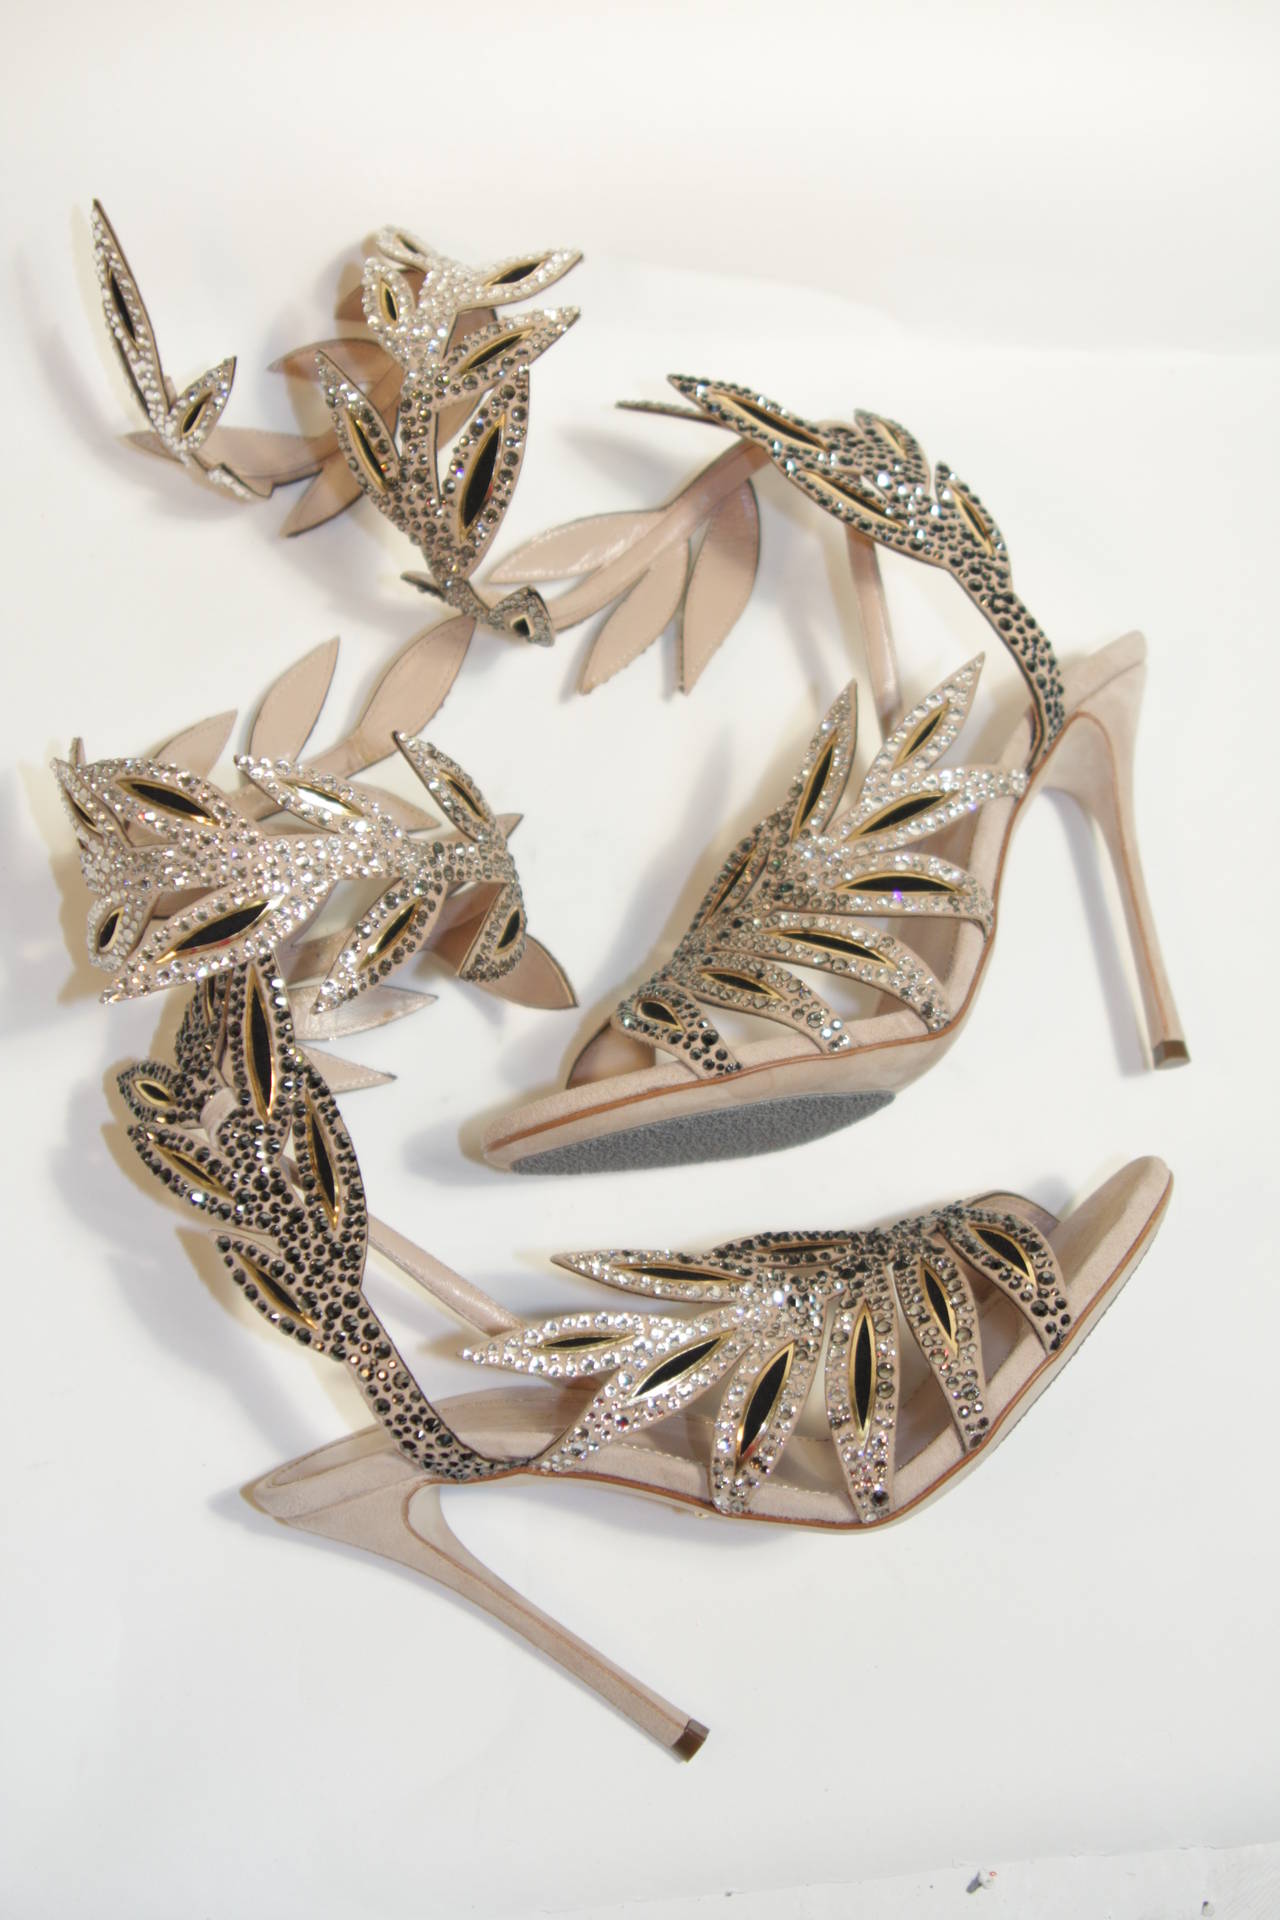 These are a phenomenal Sergio Rossi design is available for viewing at our Beverly Hills Boutique. Thes stilettos are composed of a nude suede. The heels are adorned with white and silver rhinestones and feature a striking vine silhouette which